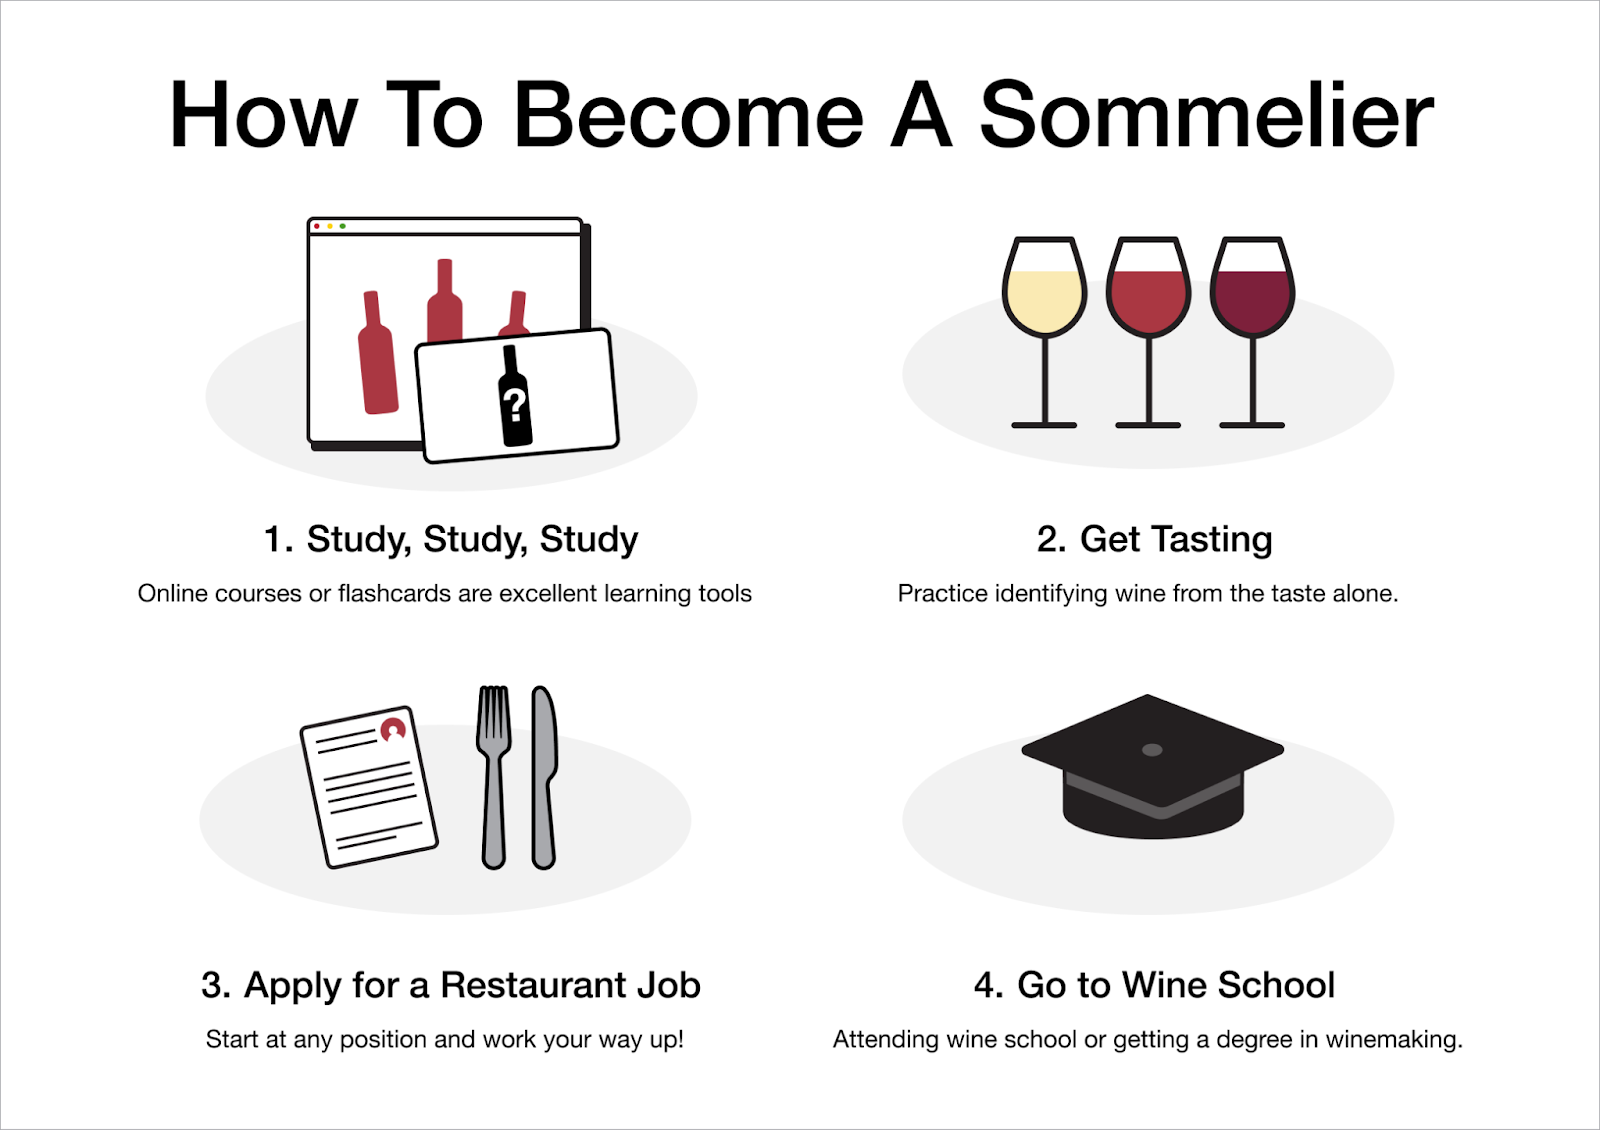 How to become a sommelier